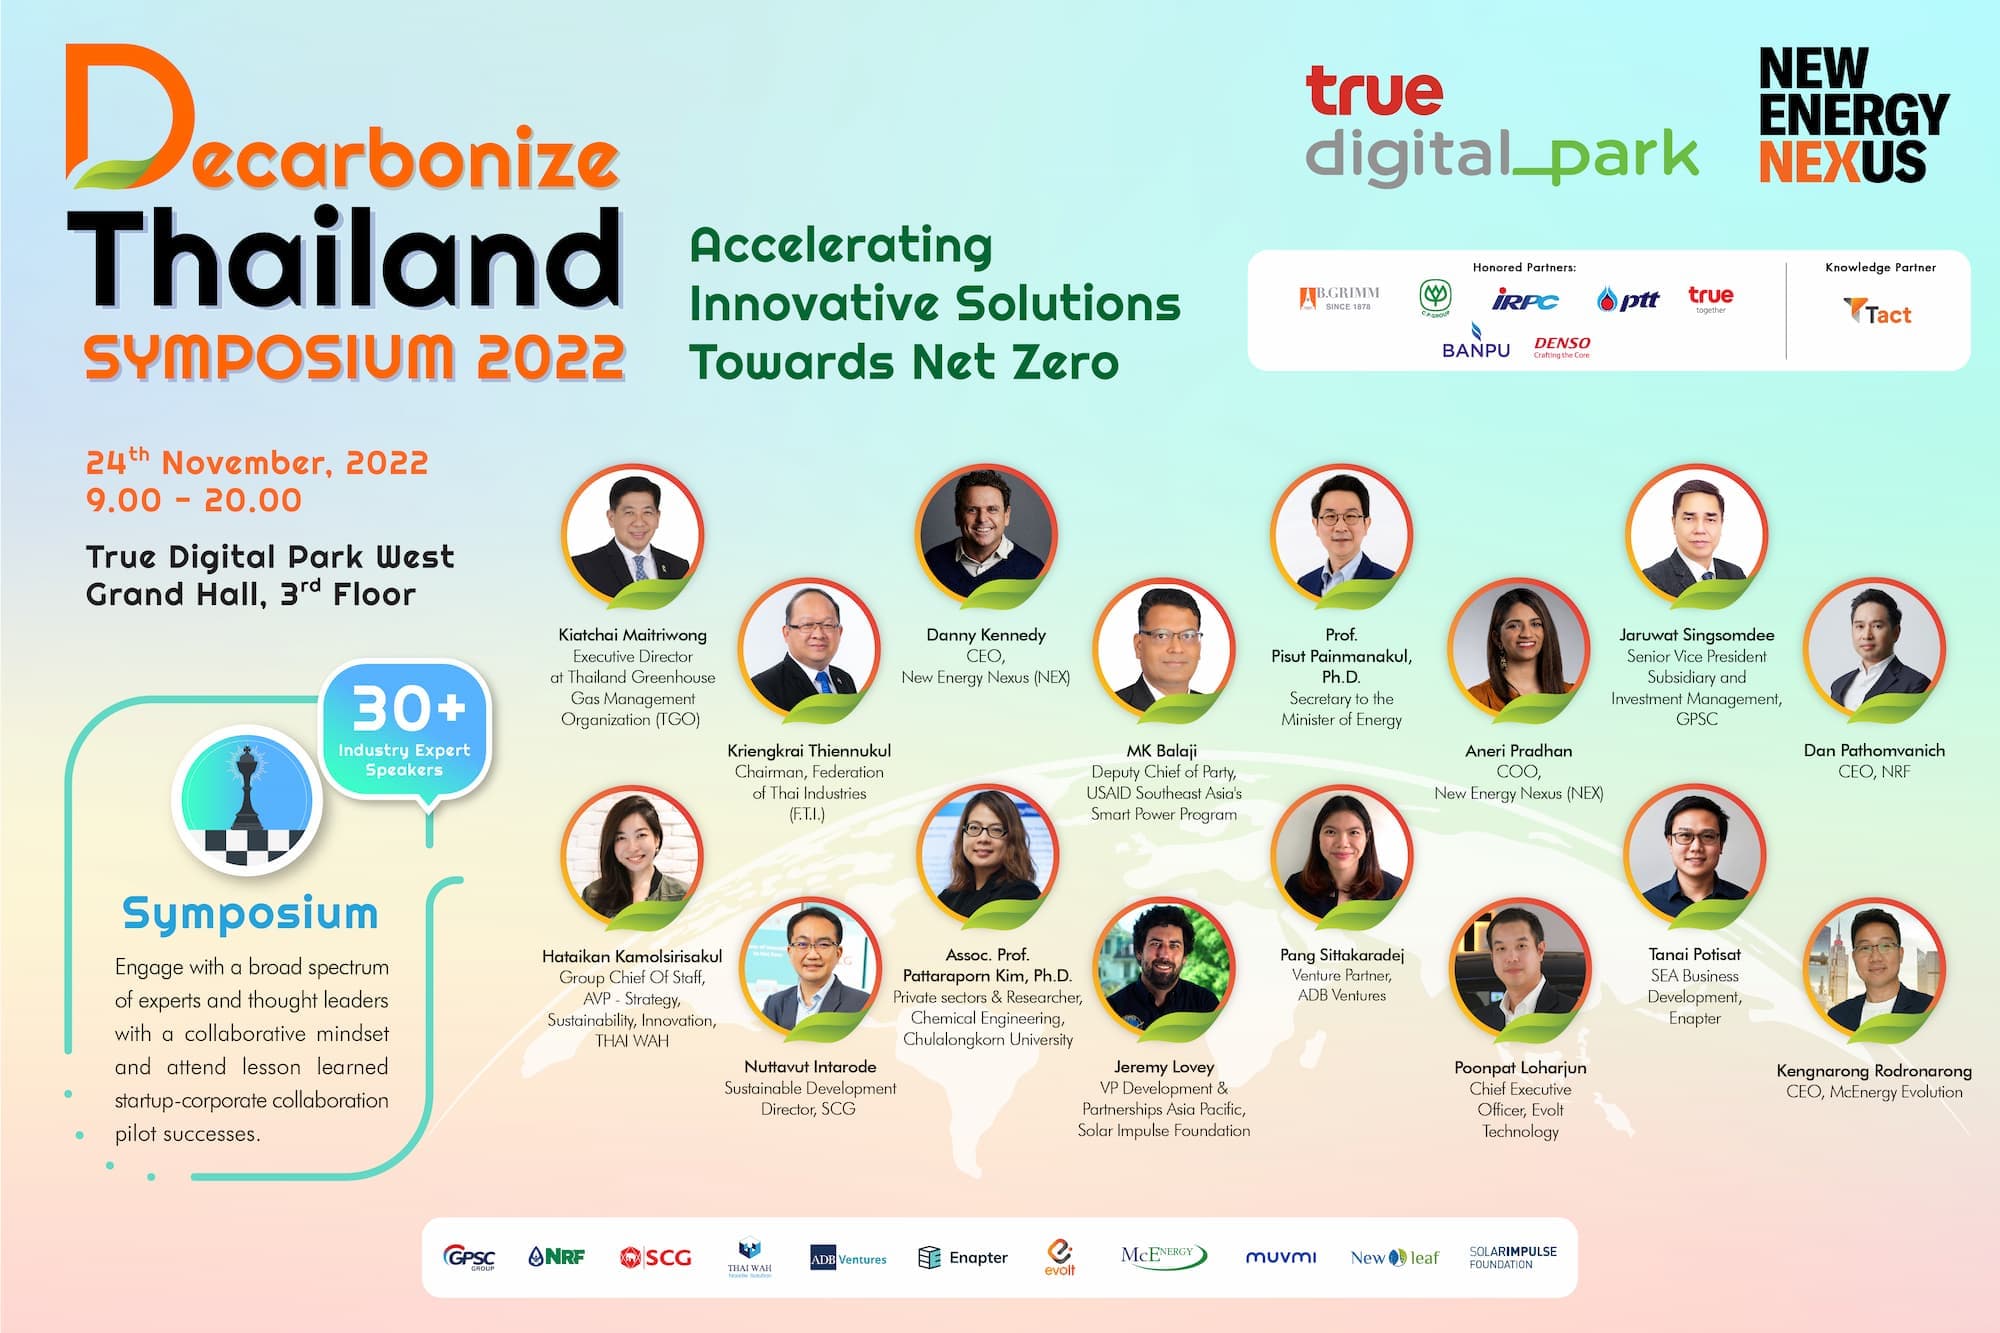 Highlights at the “Decarbonize Thailand Symposium 2022”